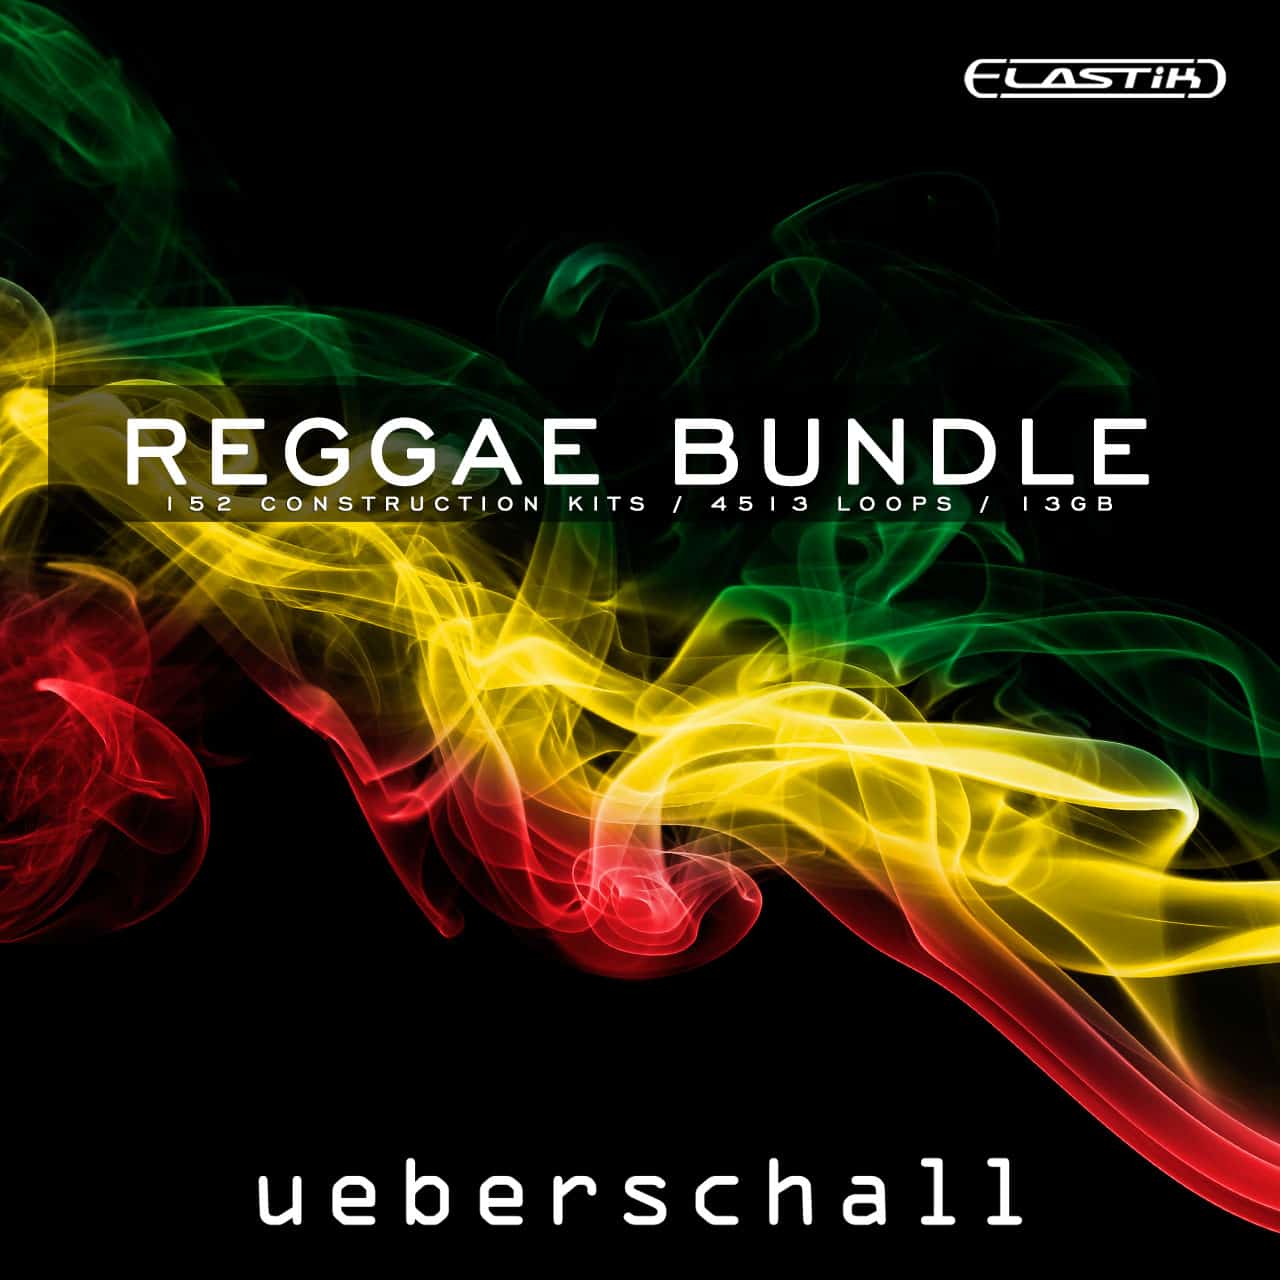 Reggae Bundle by Ueberschall – The Sample Meisters from Germany